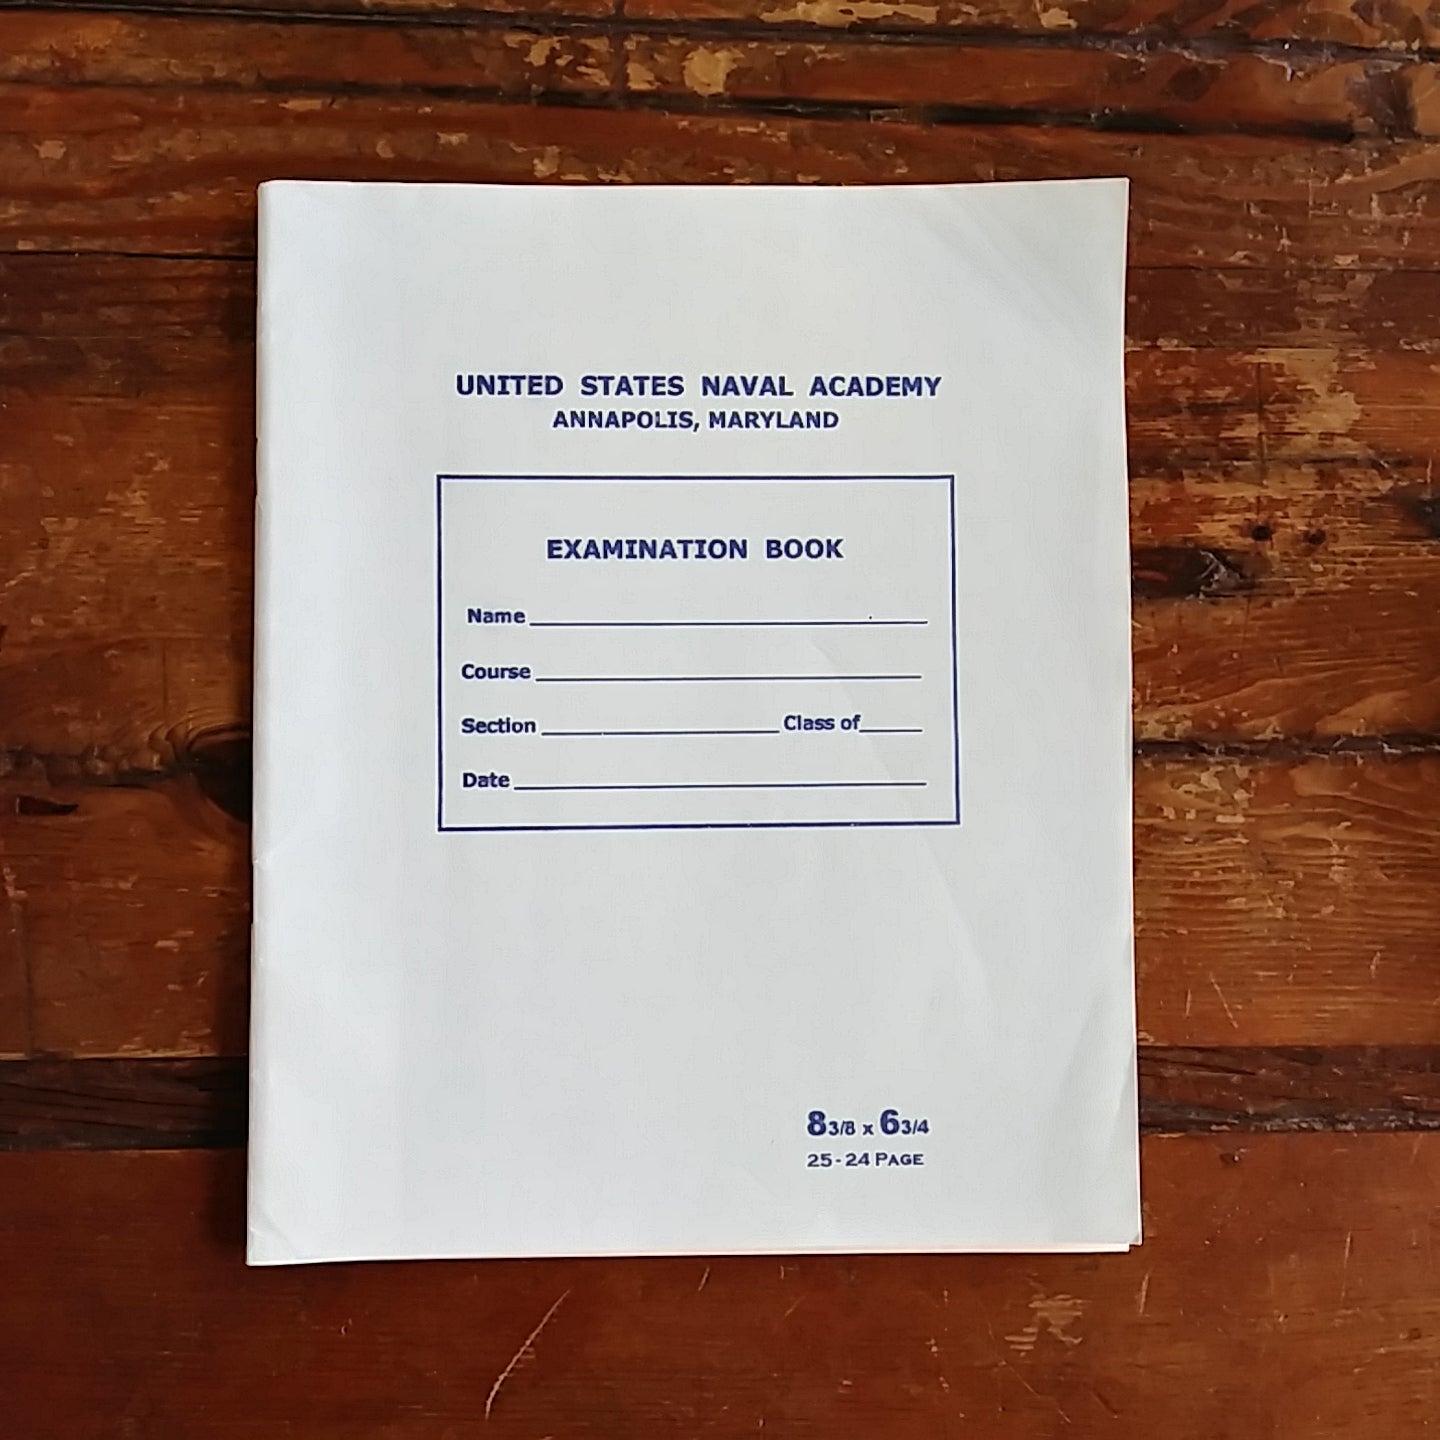 Book, "United States Naval Academy Annapolis Maryland - Examination Book"